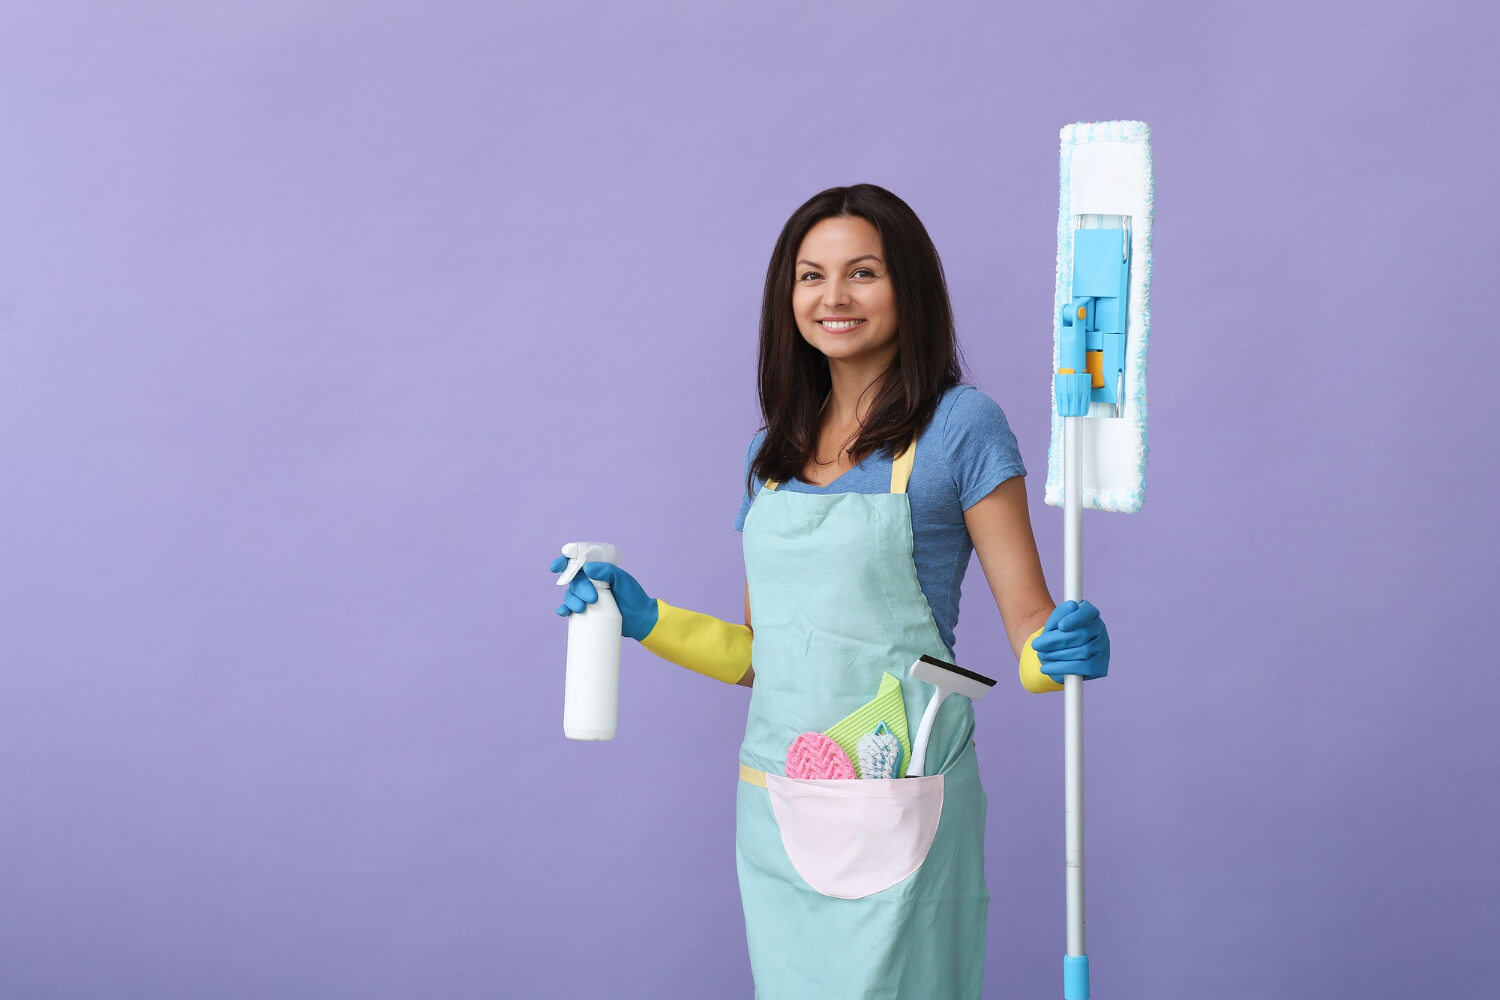 10 Benefits of Hiring a Professional House Cleaning Service